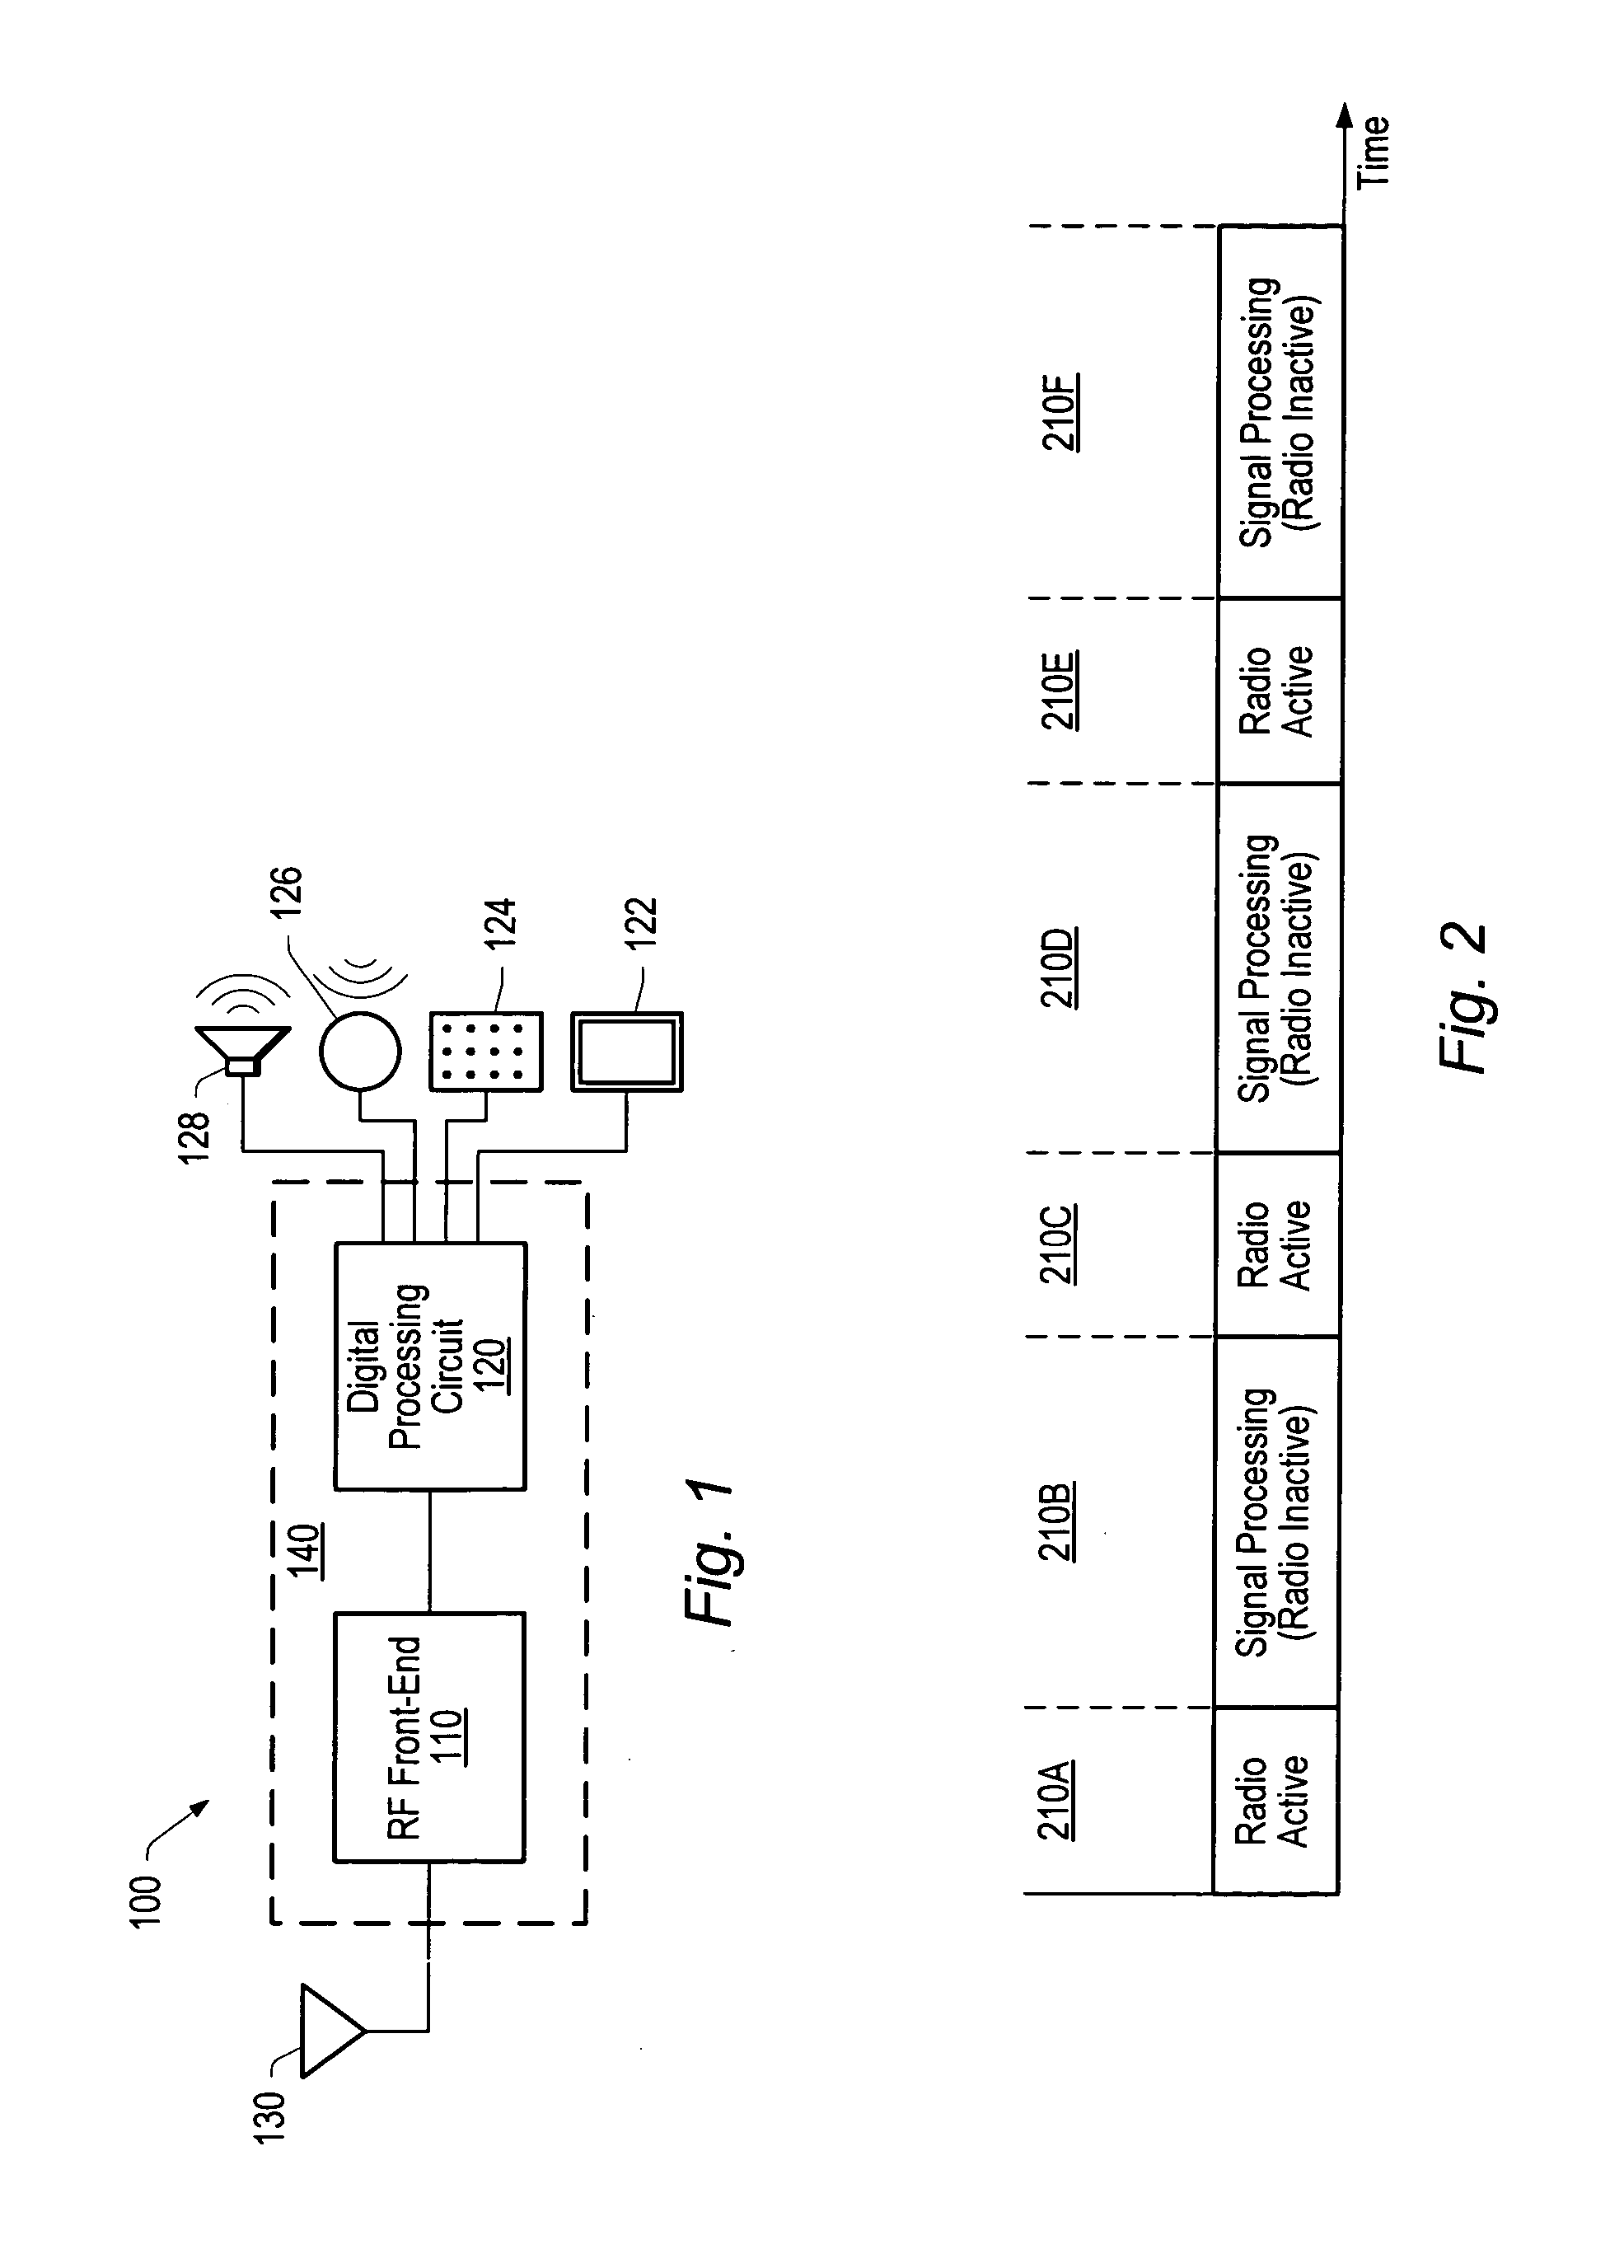 Communication apparatus implementing time domain isolation with restricted bus access